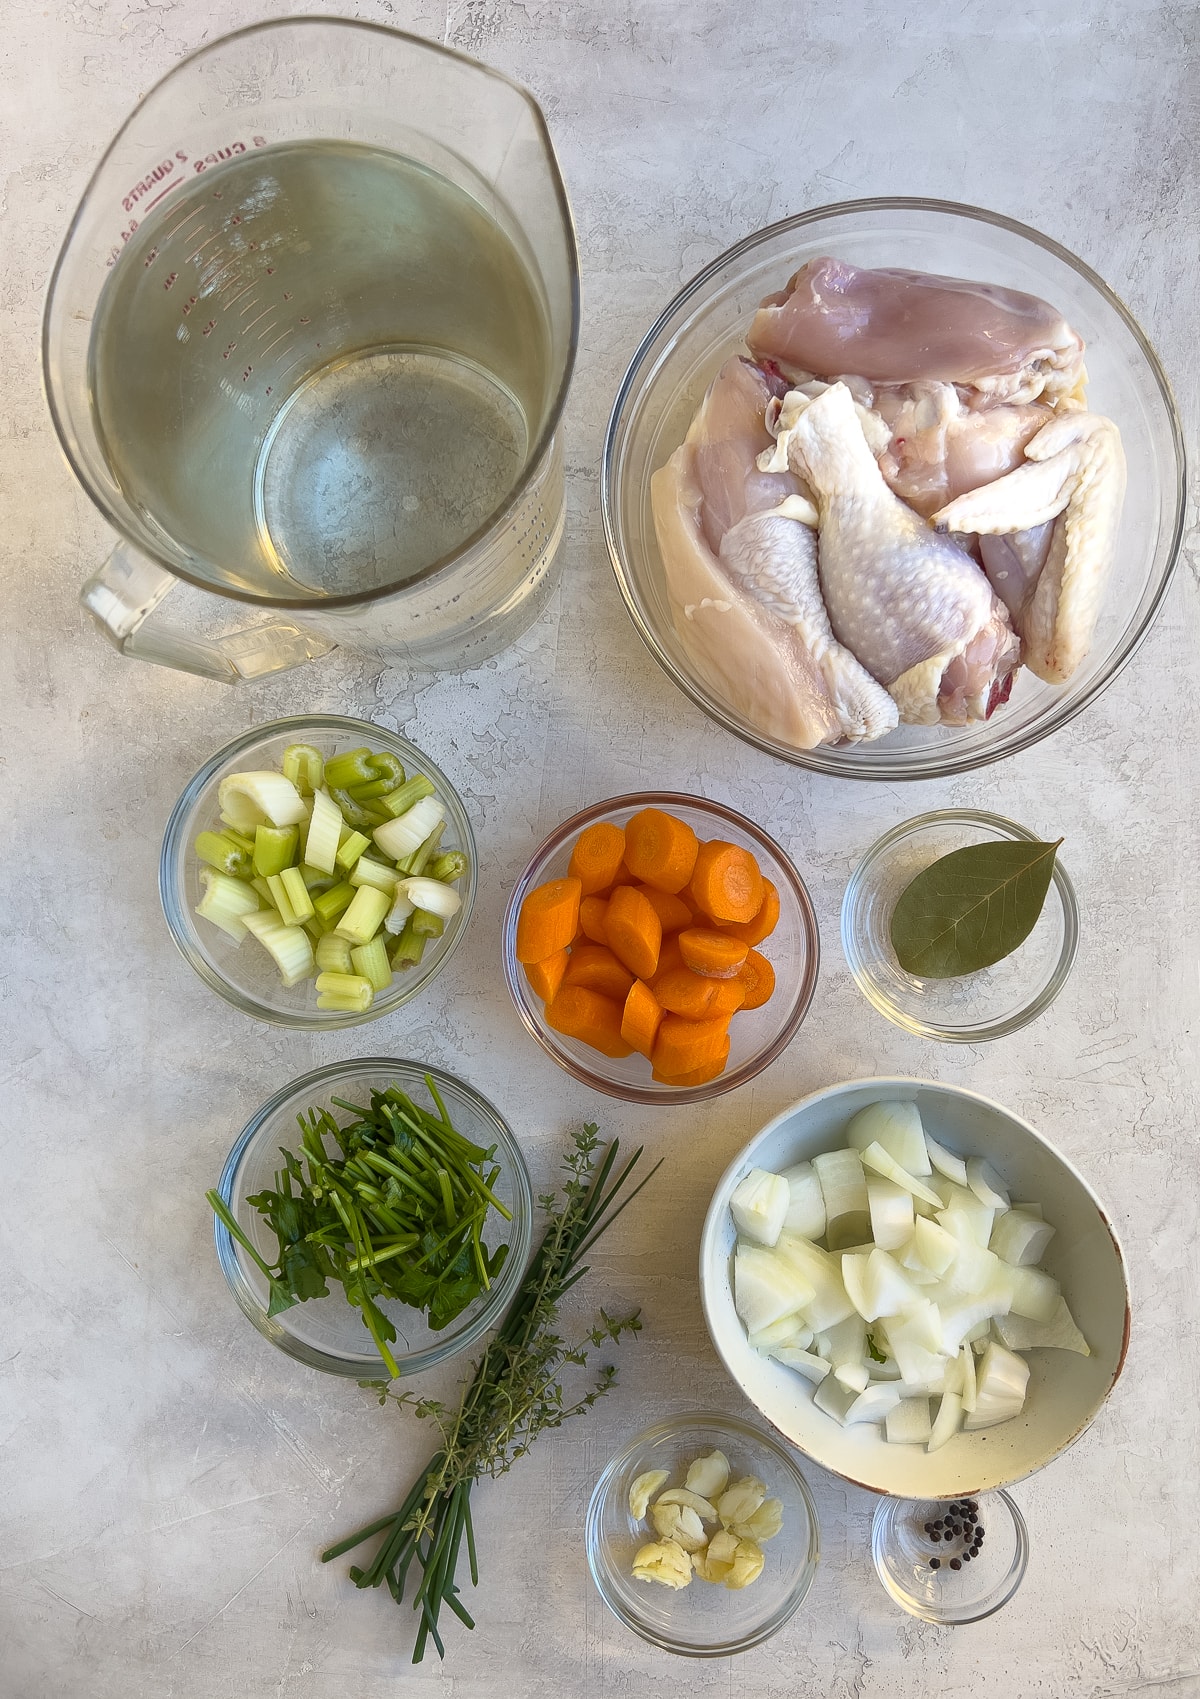 Ingredients for Instant Pot chicken broth.